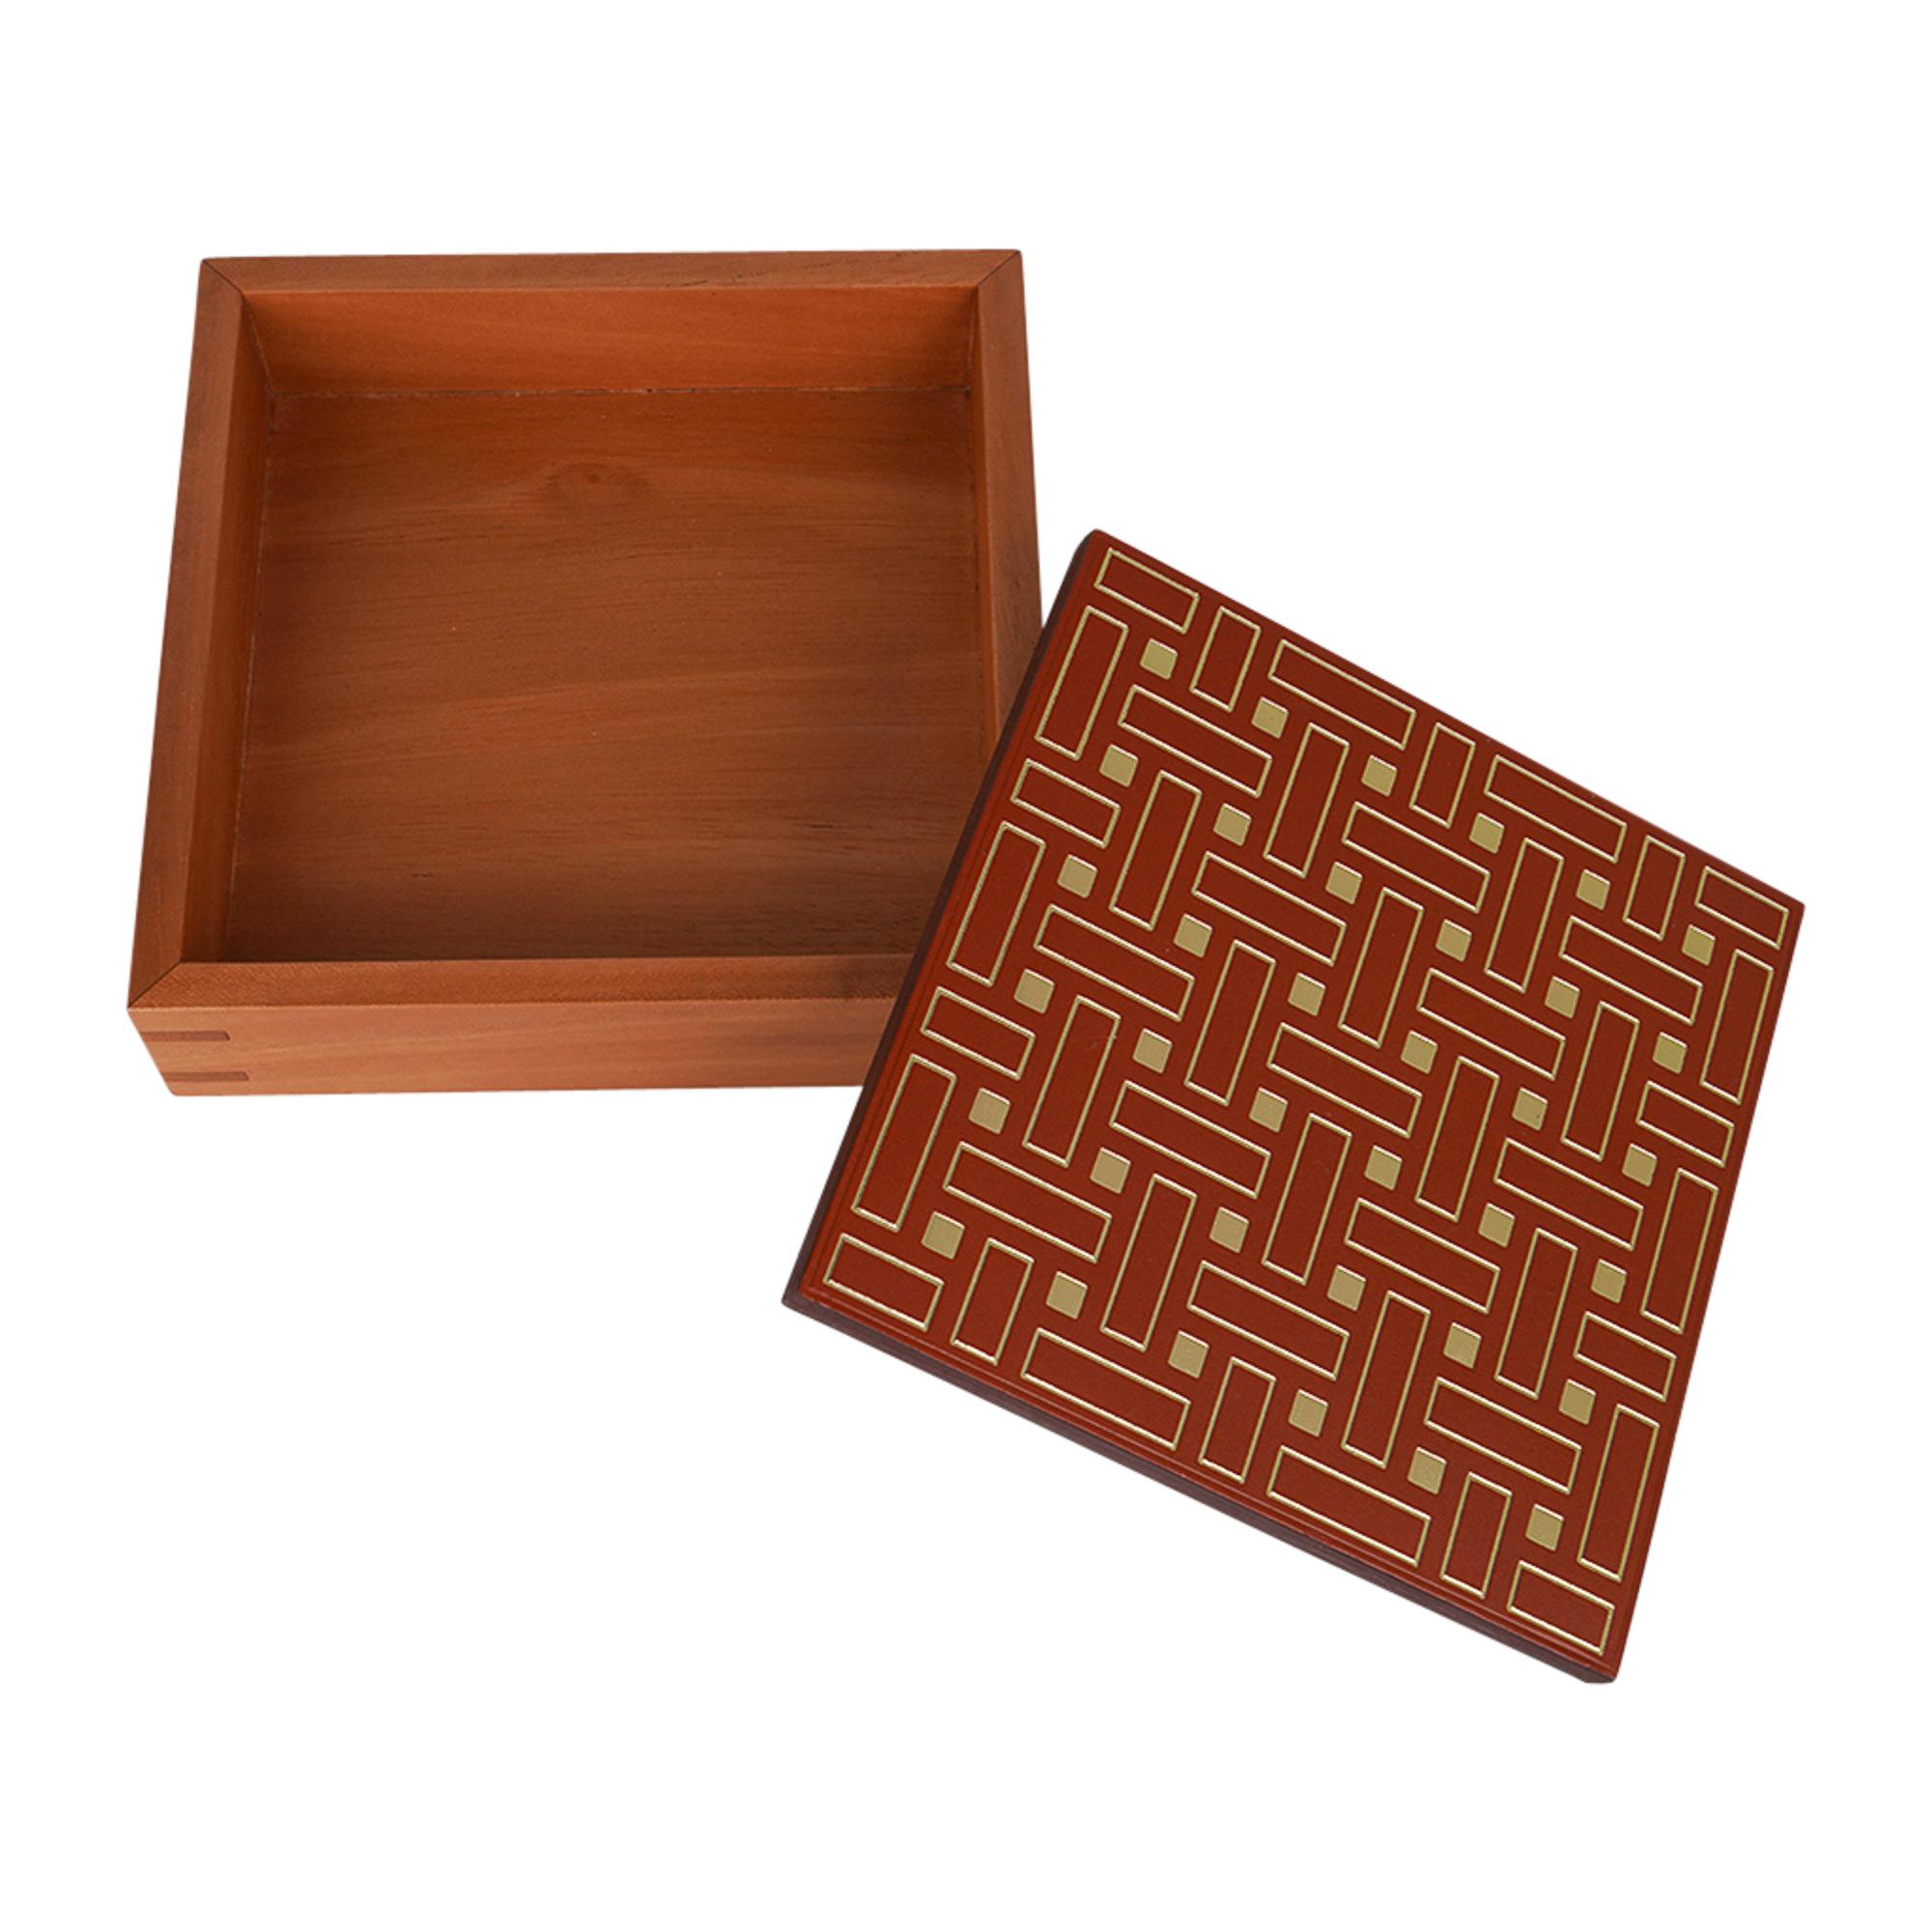 Mightychic offers a Hermes Theoreme Mosaique Or box featured in the small model.
Natural Mahogany wood with bridle leather lid sheets stamped
with gold Mosaique motif.
Bridle leather lid hot foil stamped using traditional bookbinding technique.
Base